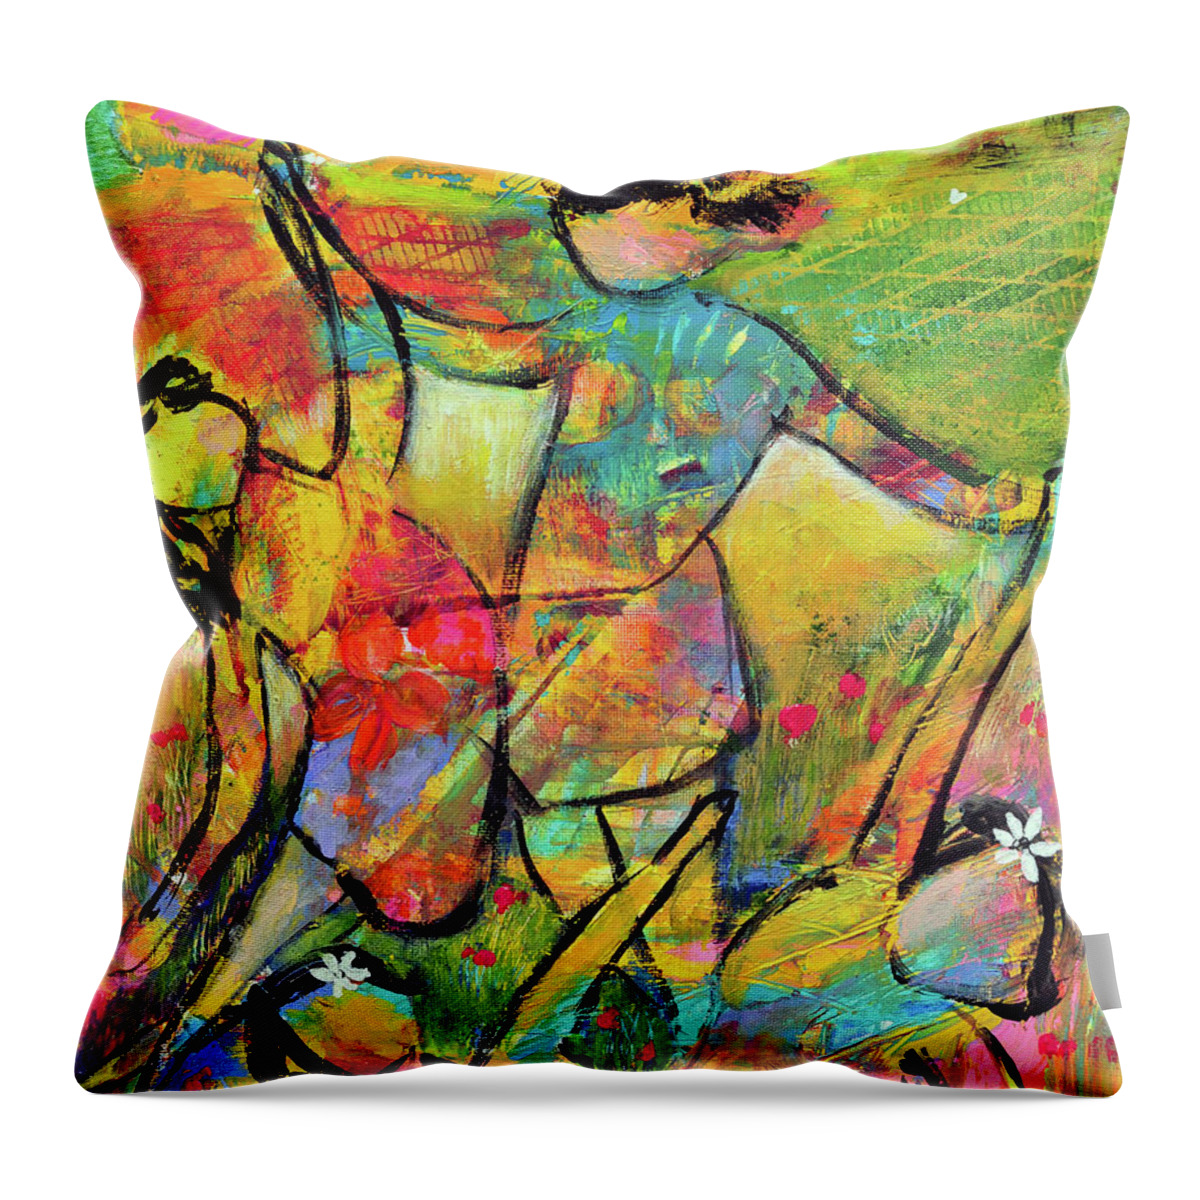 Abstract Figures Throw Pillow featuring the painting Dance Like You Mean It by Haleh Mahbod